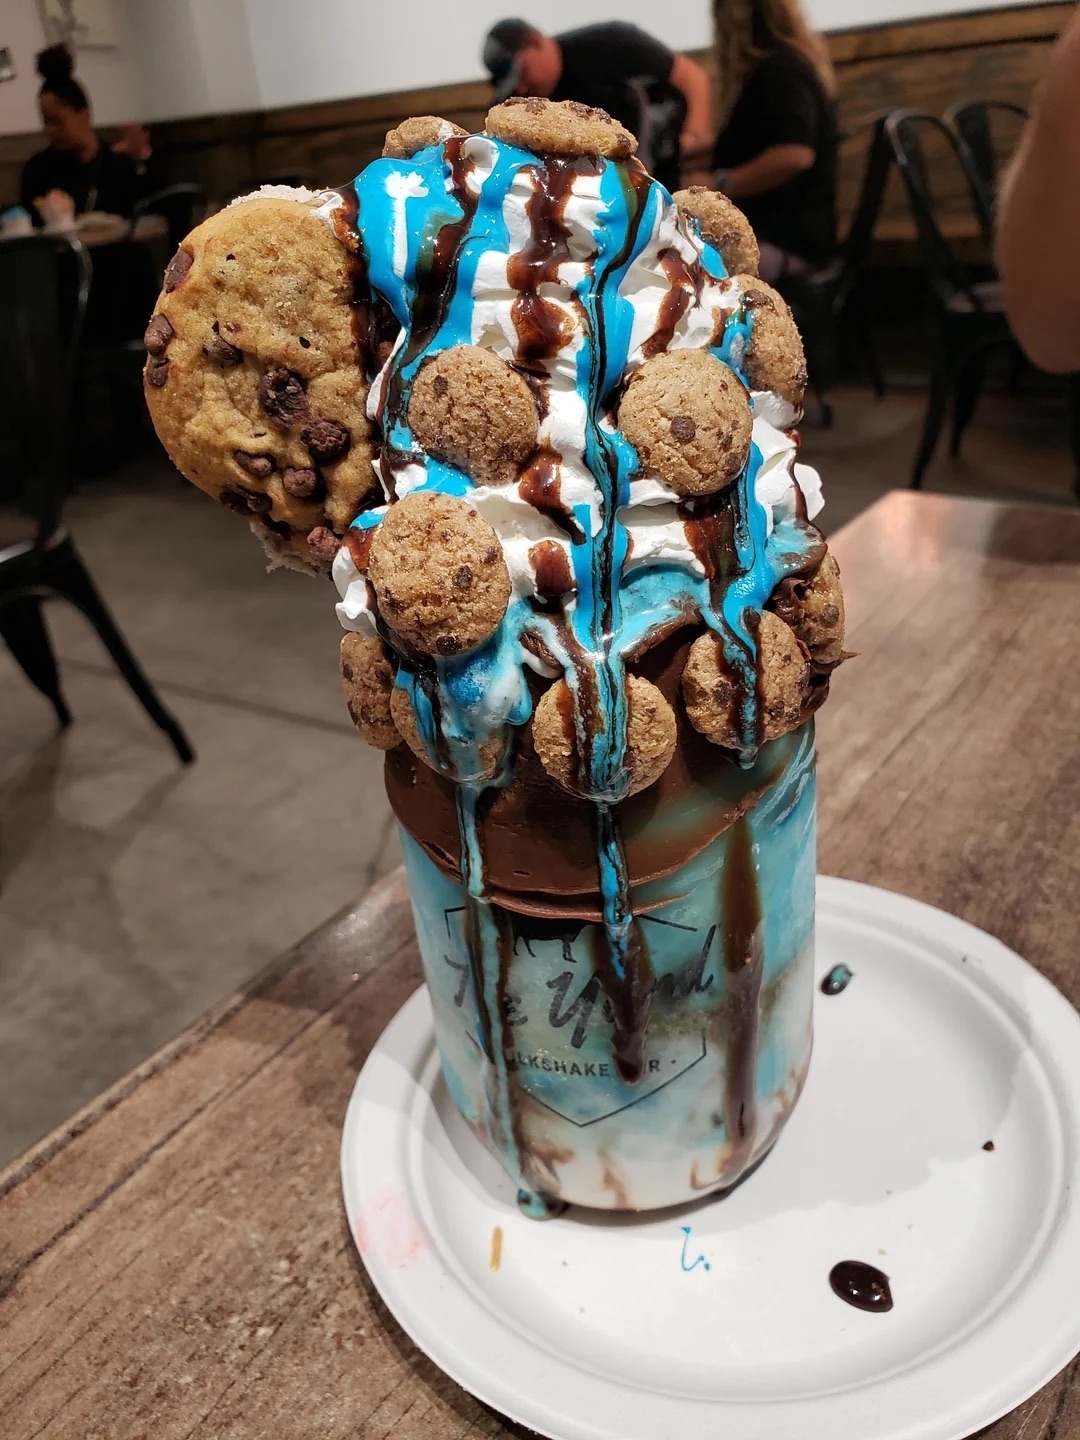 Over-the-top milkshake topped with whipped cream, chocolate syrup, cookie chunks, and a large cookie